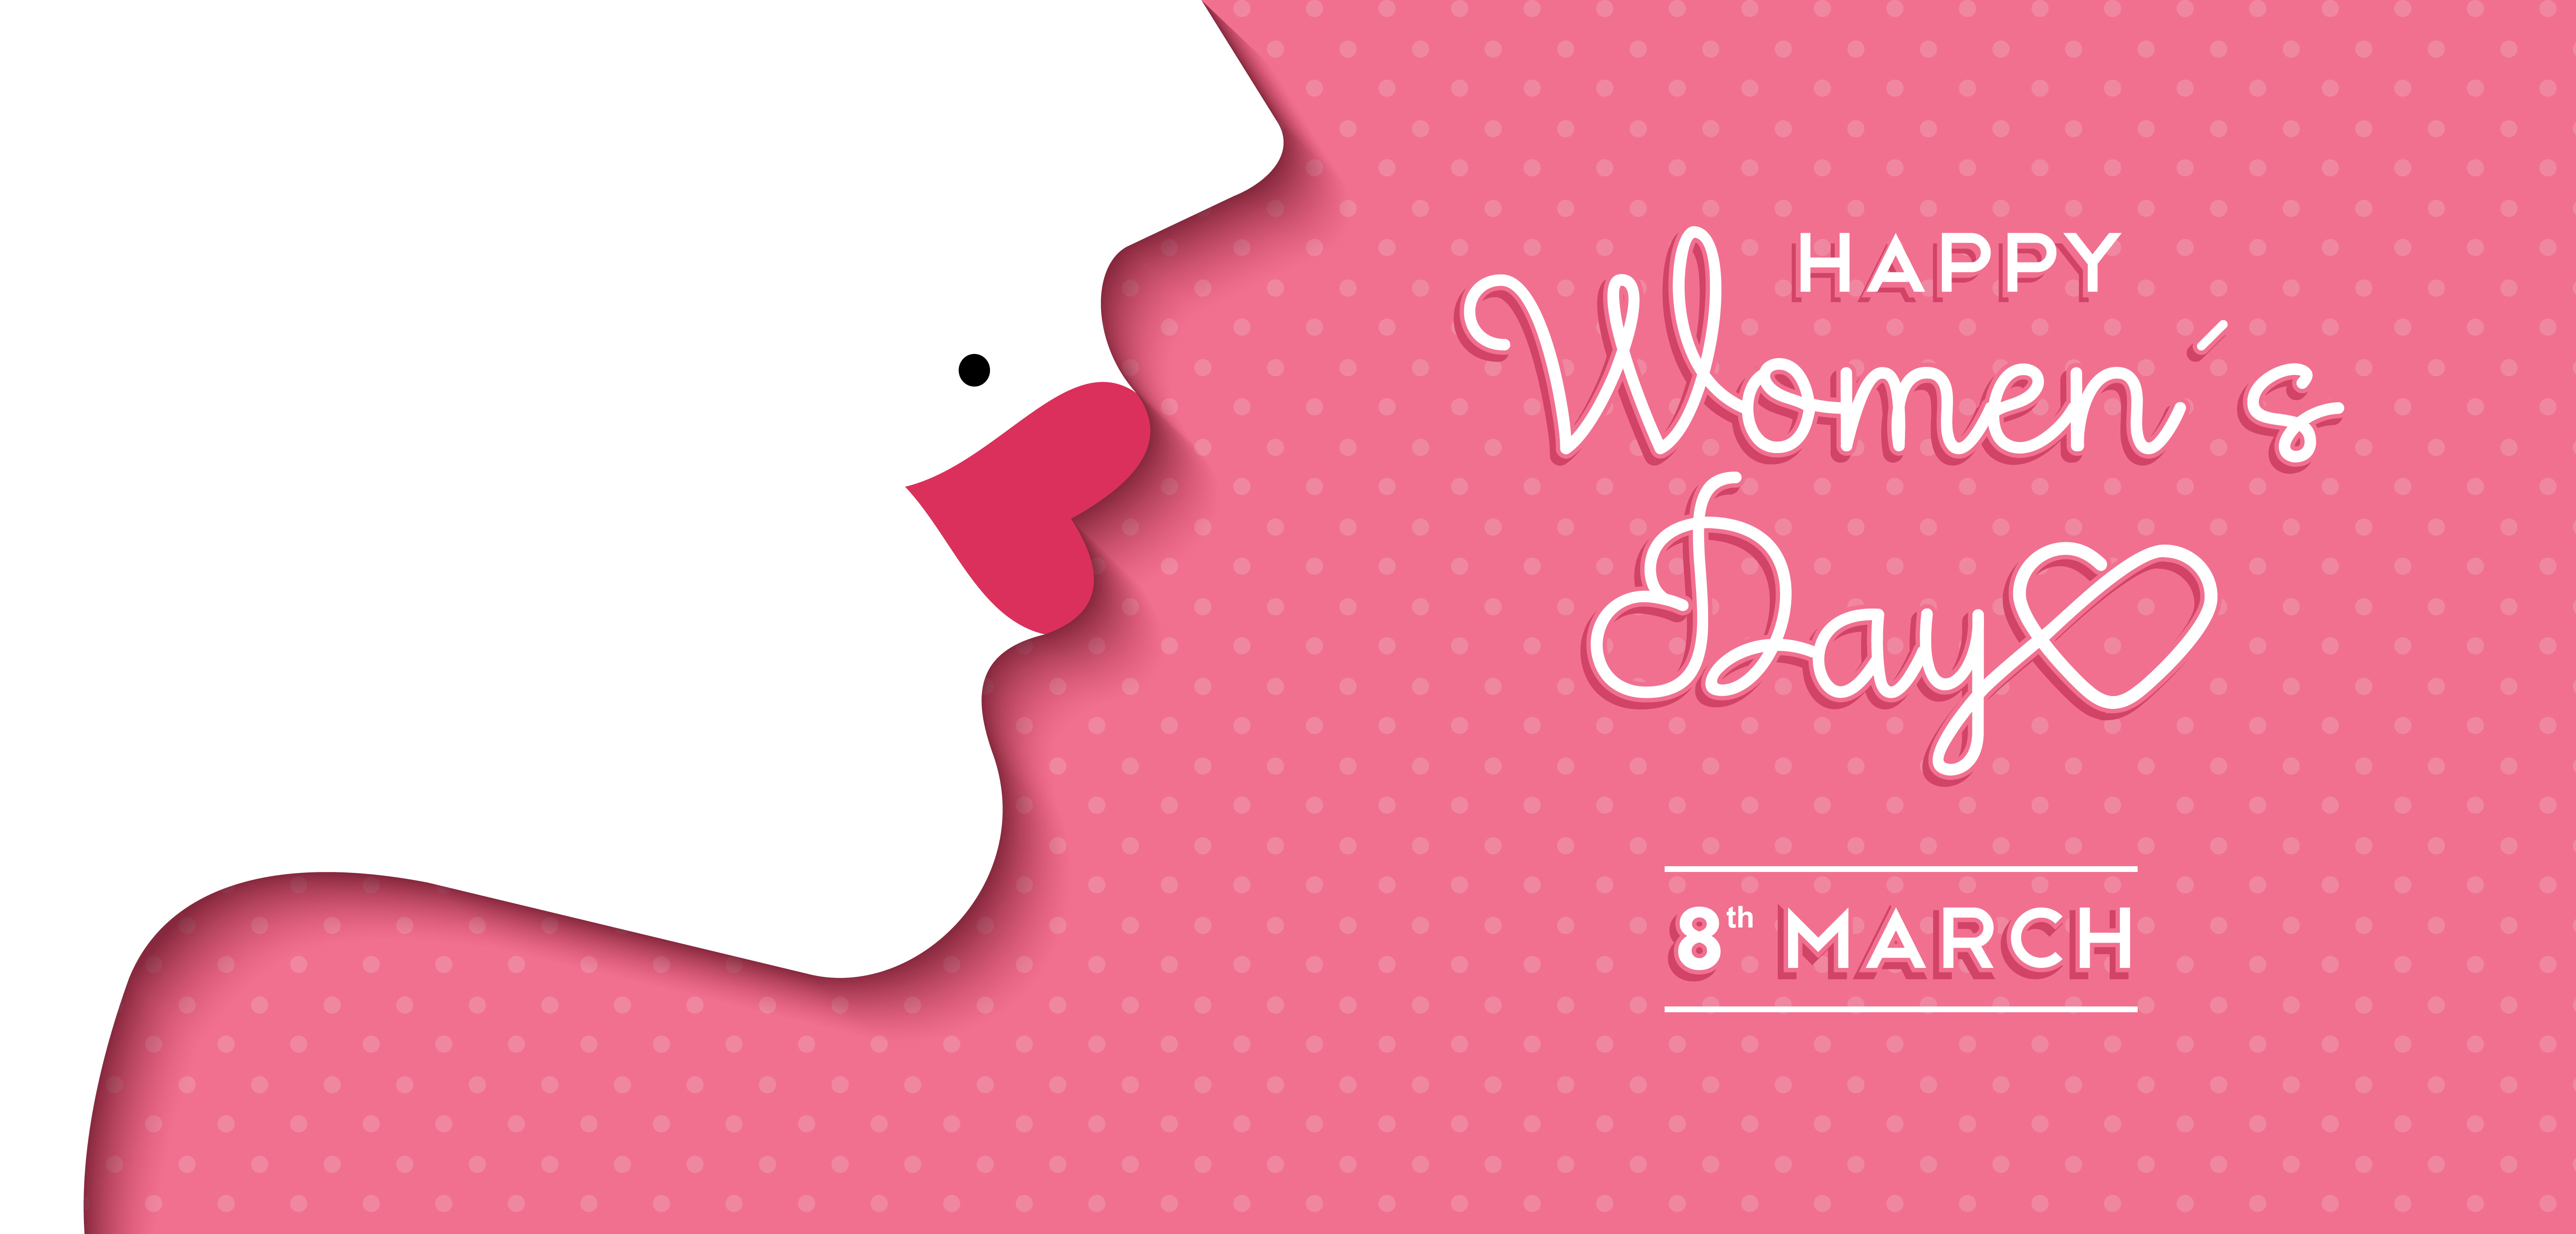 Happy International Women's Day on March 8th design background. Illustration of woman's face profile with retro style makeup. EPS10 vector.